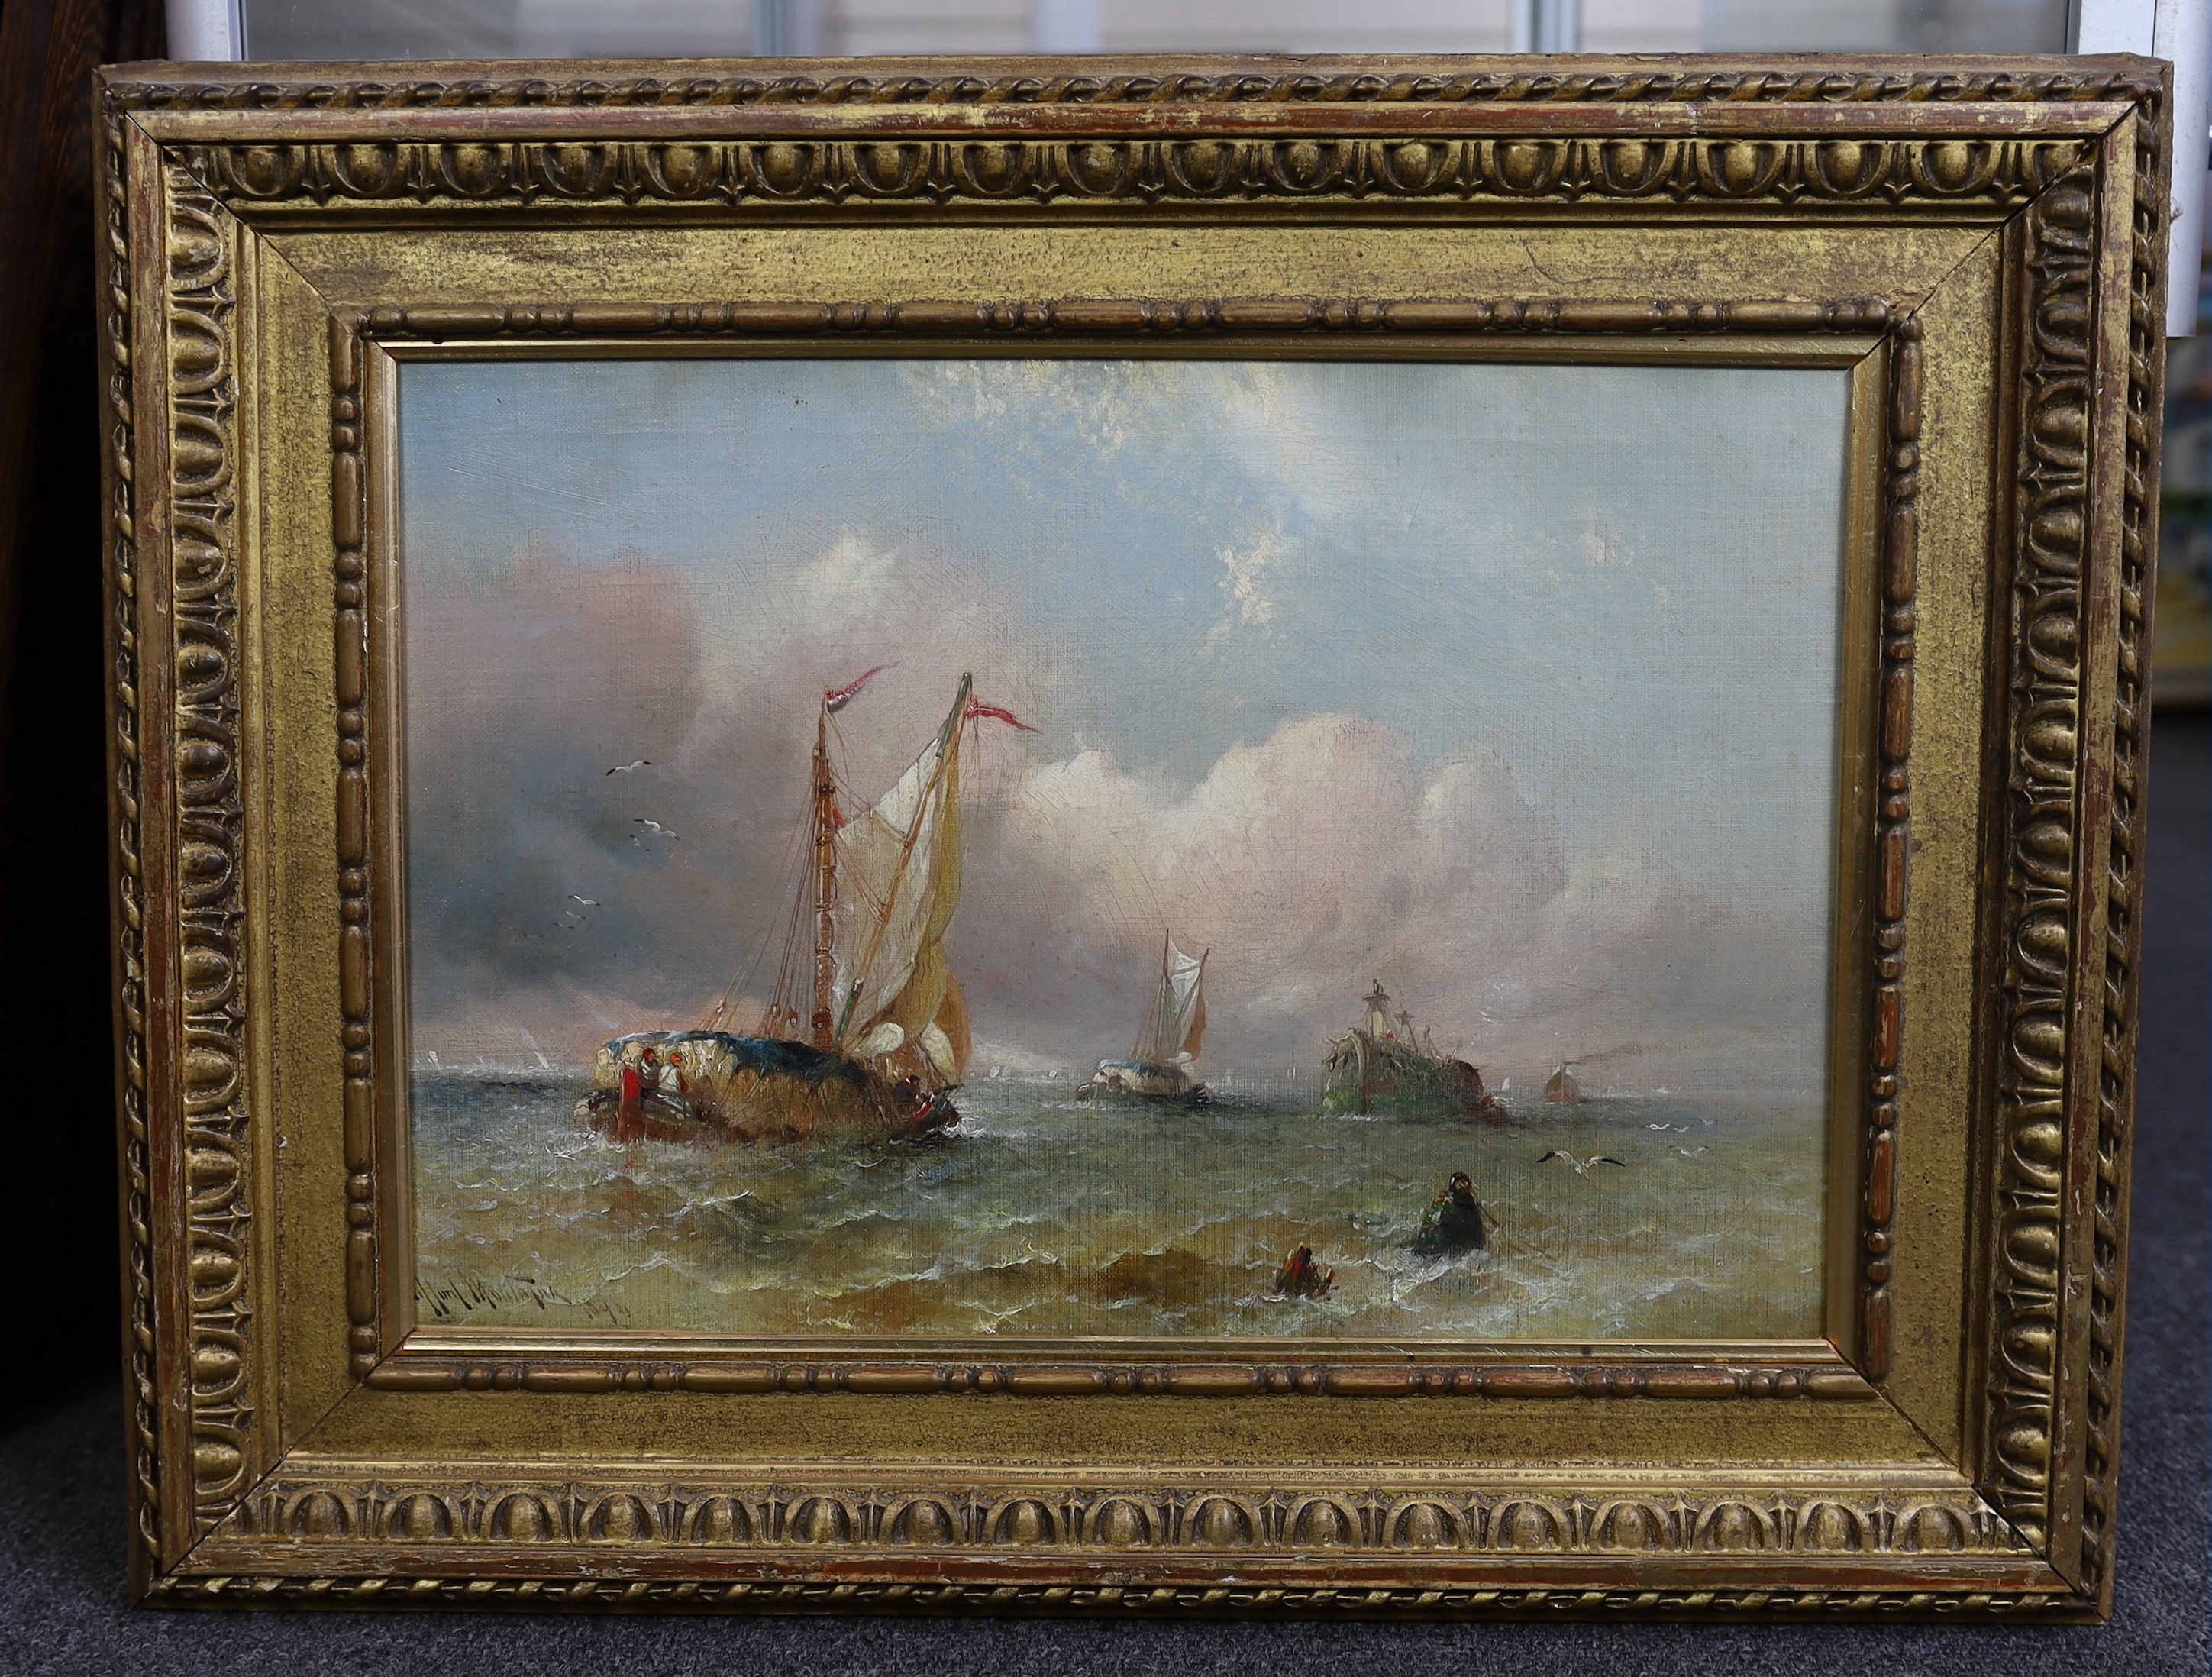 Clifford Montague (British, 1845-1901), Hay barges off the coast, oil on canvas, 28.5 x 41cm